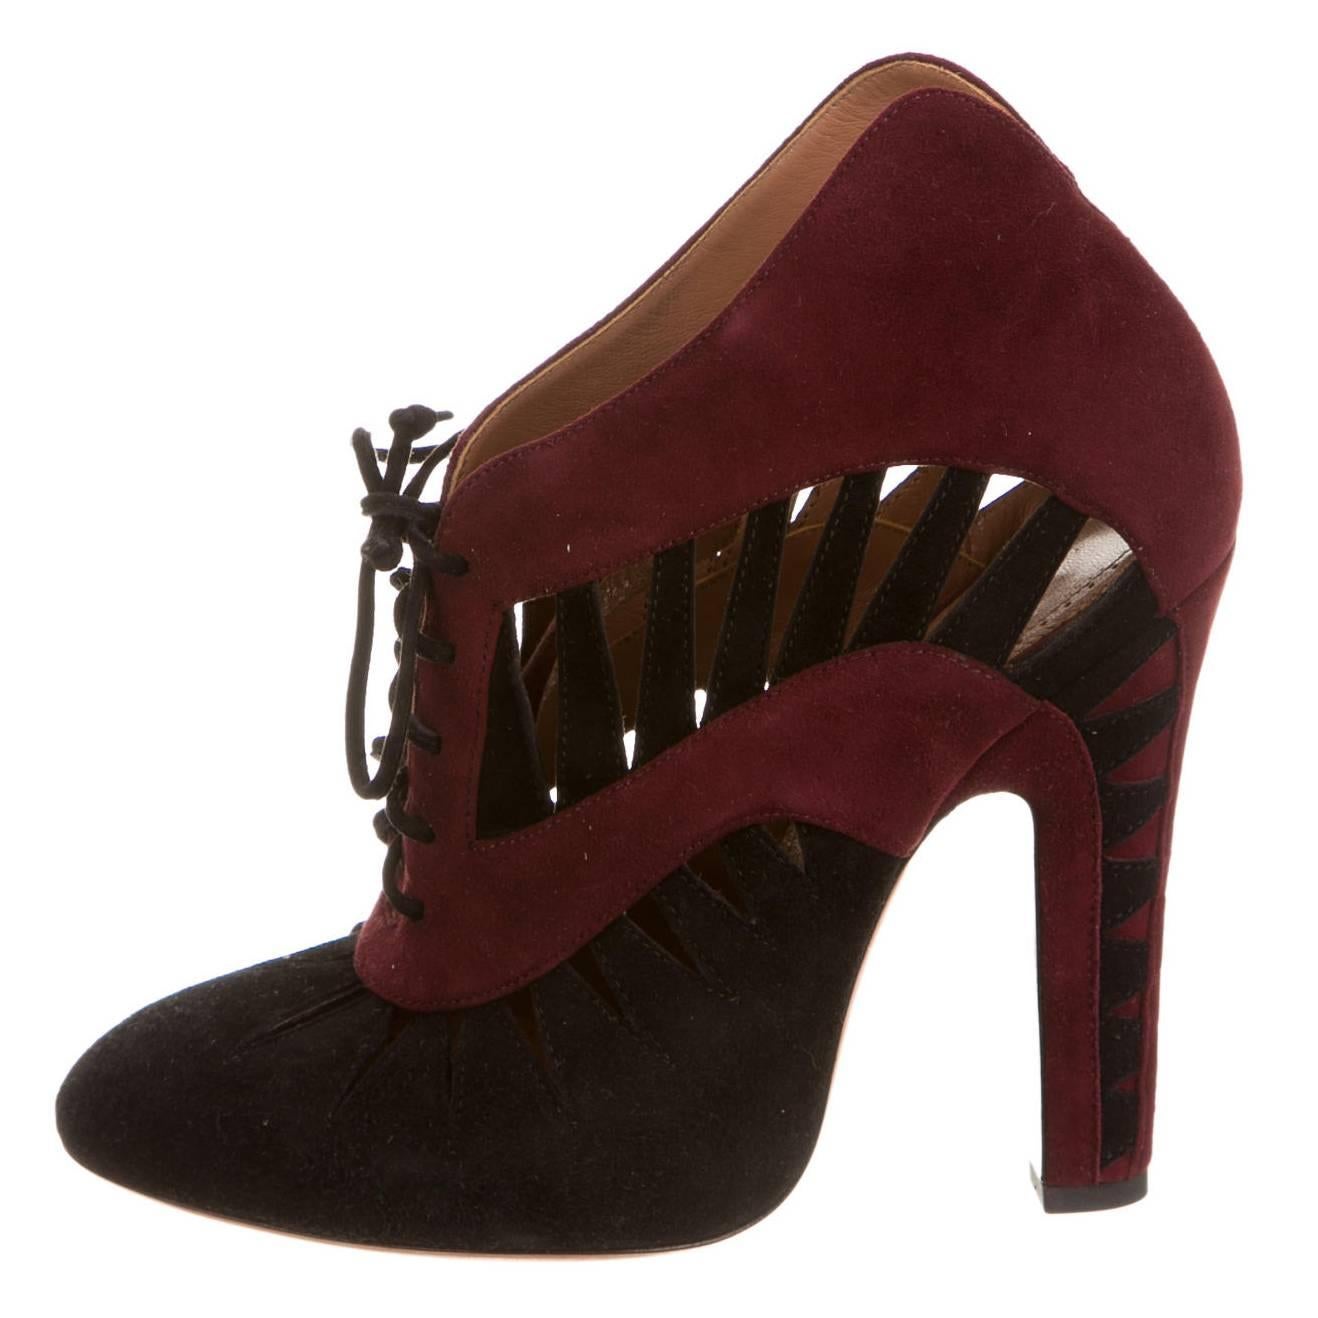 Alaia NEW & SOLD OUT Burgundy Black SuedeCut Out Lace Up Ankle Booties in Box 